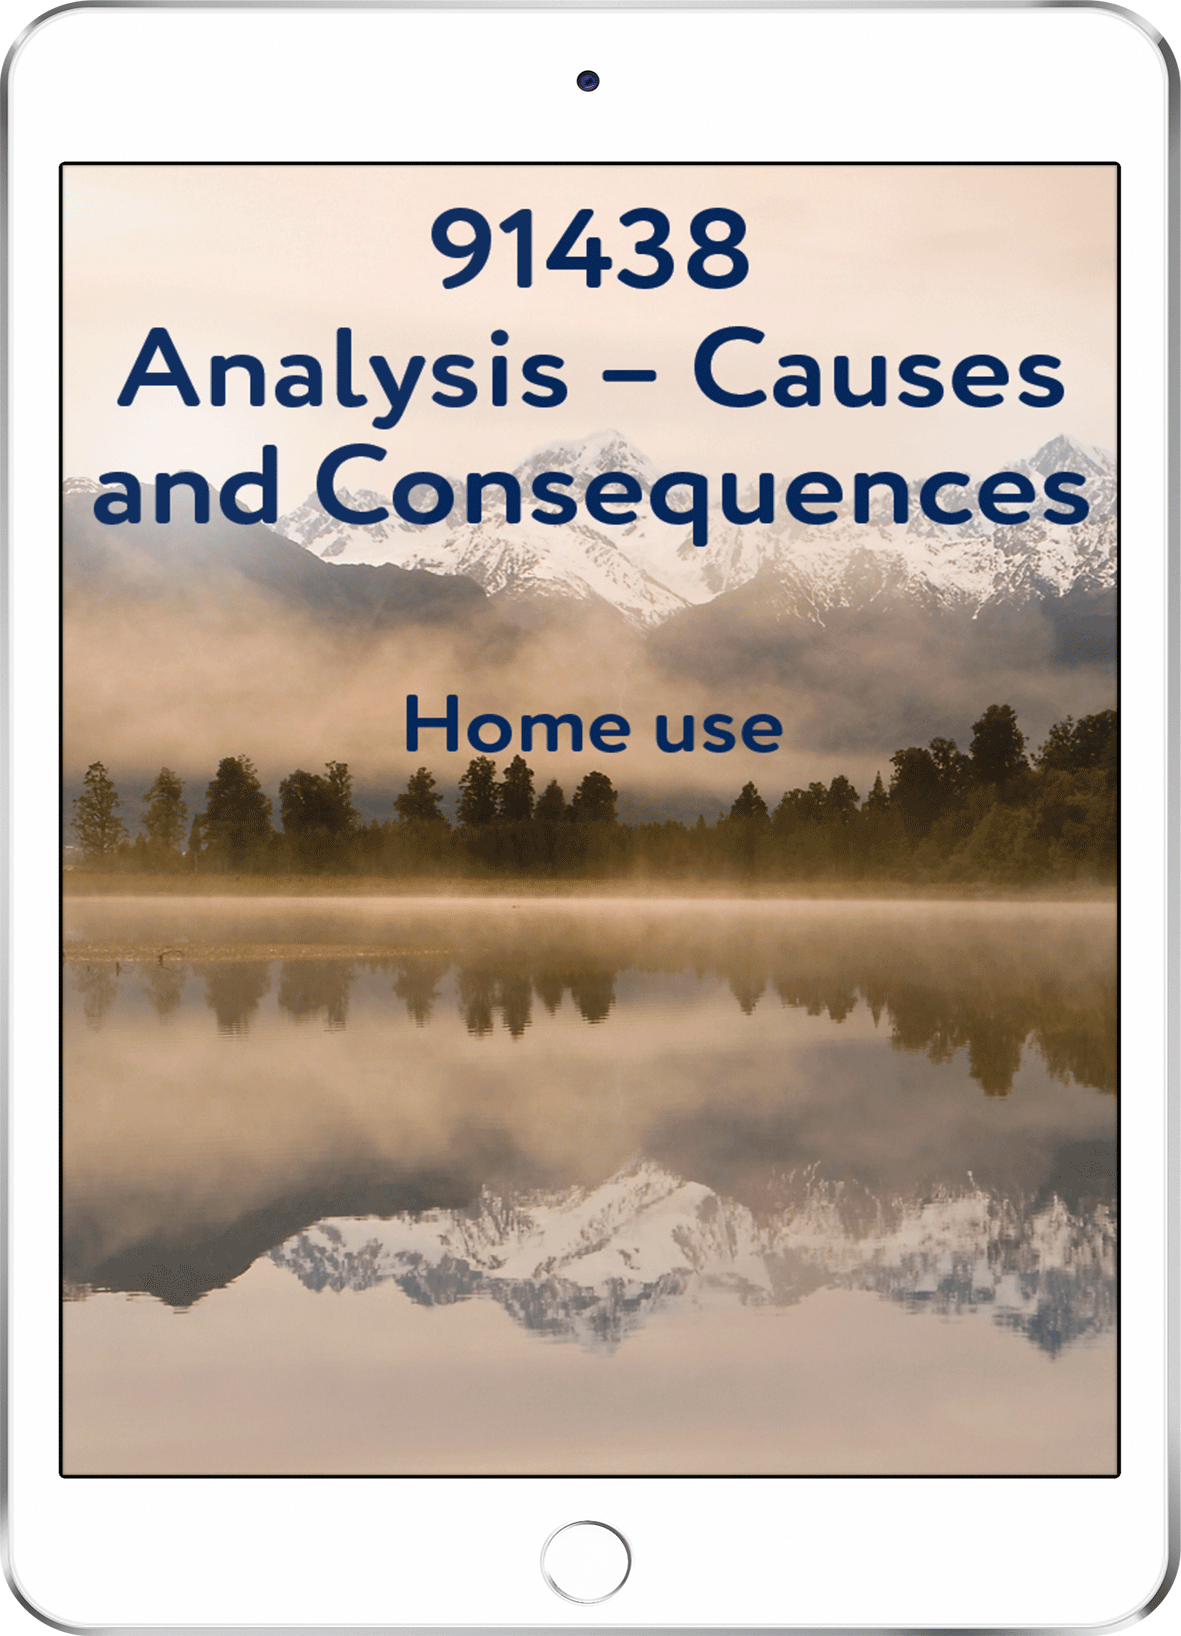 91438 Analysis - Causes and Consequences - Home Use